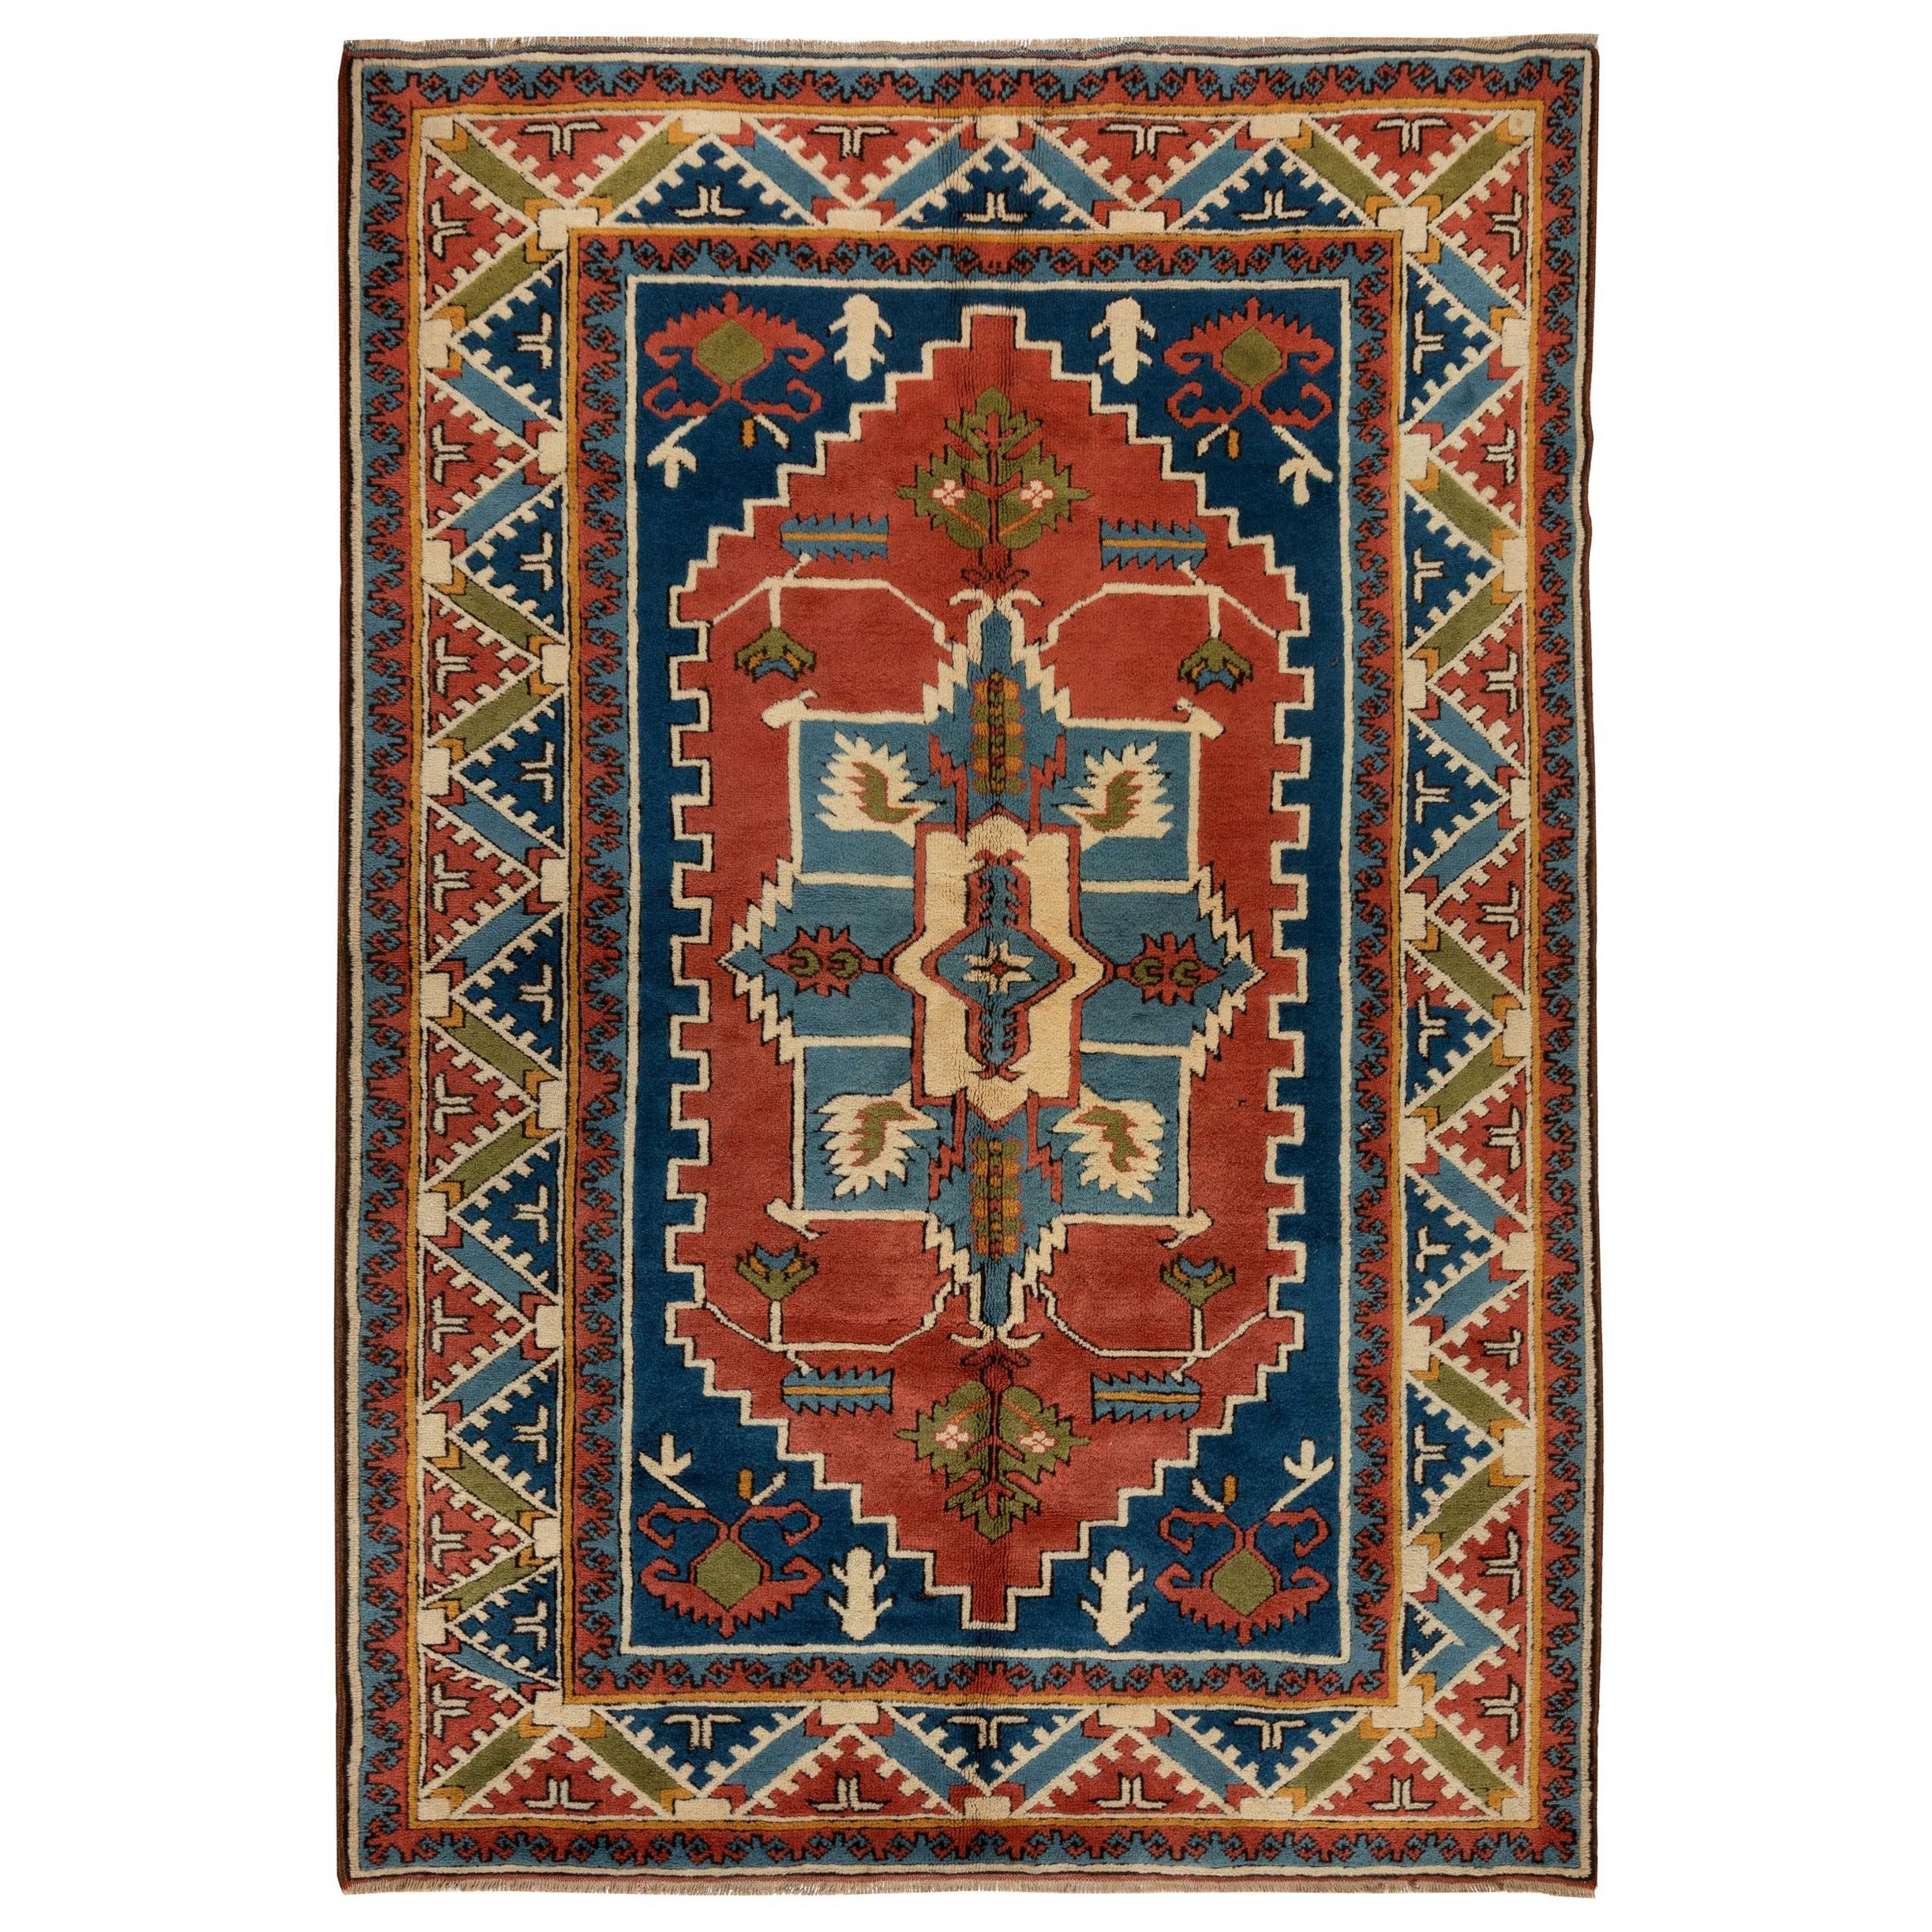 6x8.6 Ft Hand-Knotted New Area Rug, Soft Medium Wool Pile, Anatolian Carpet